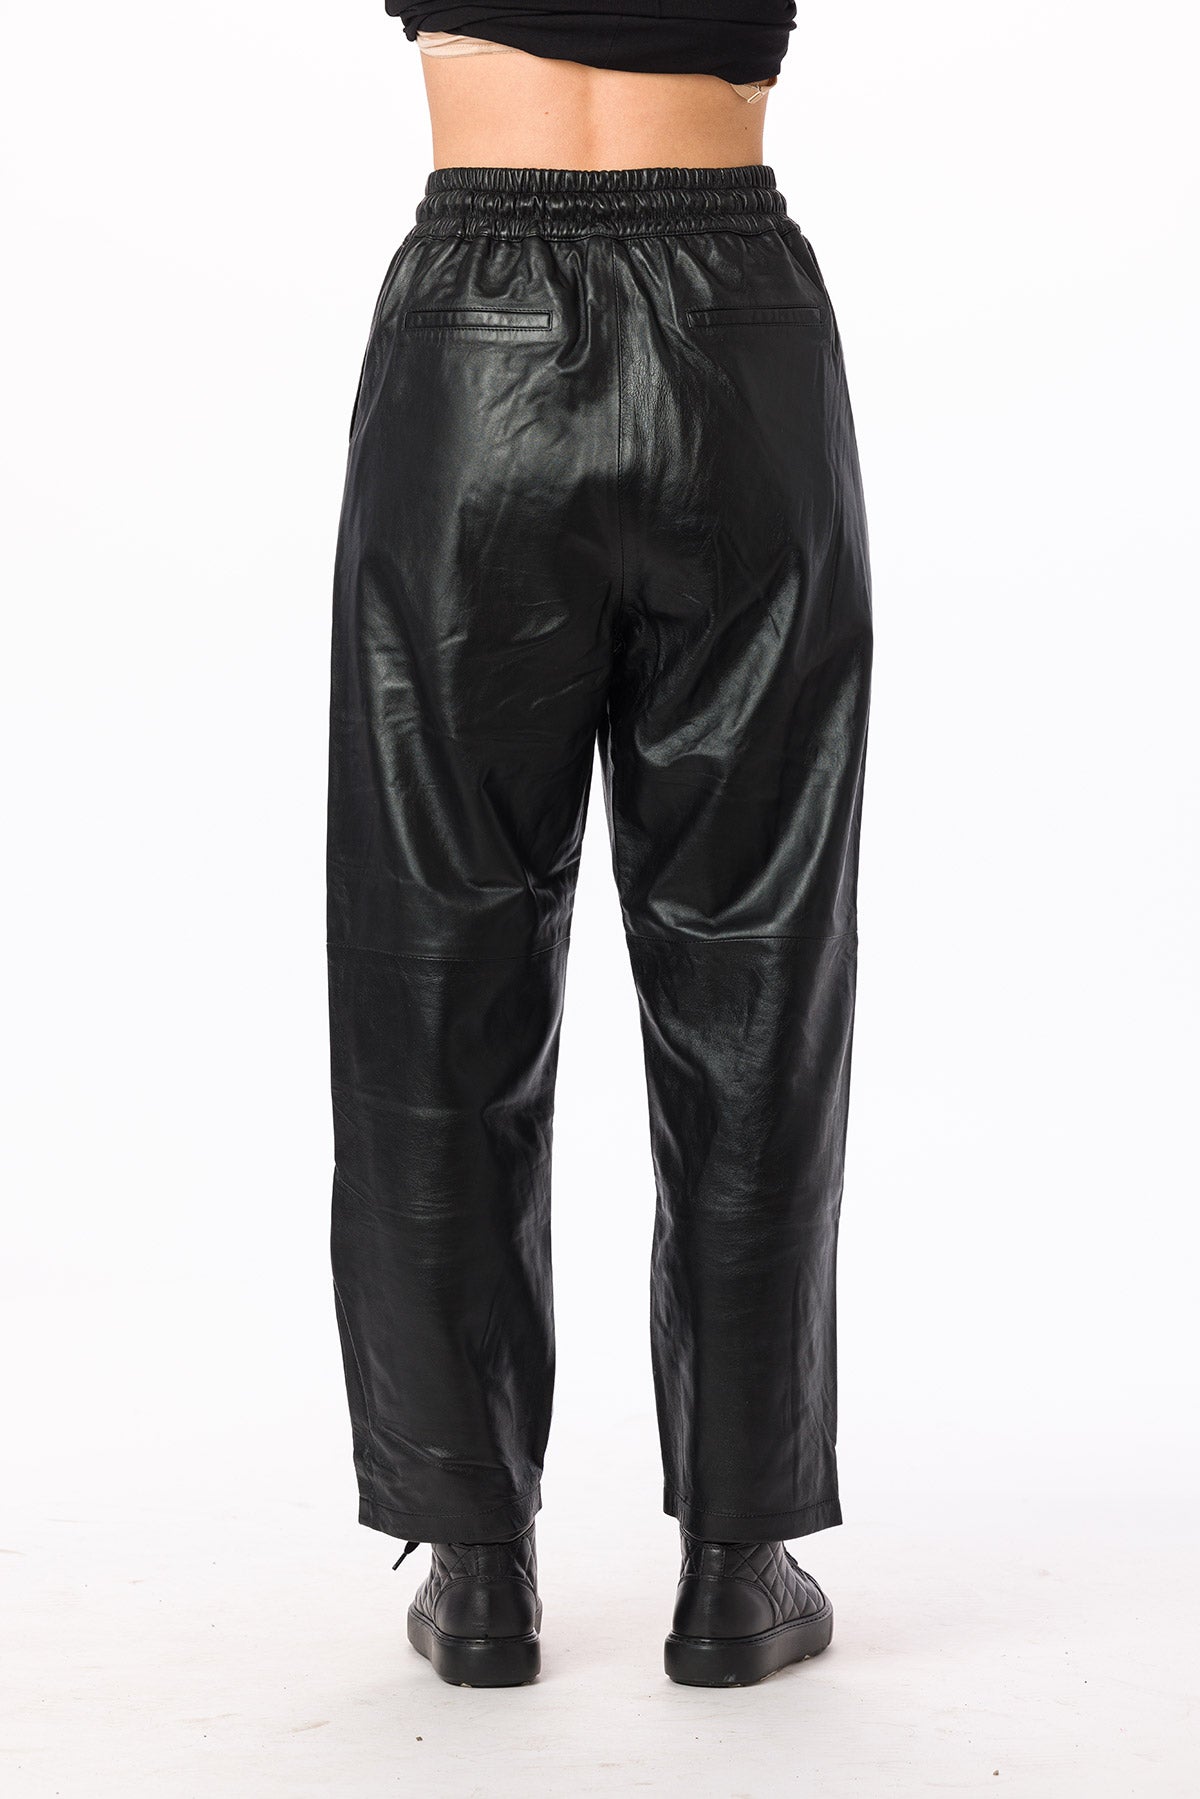 Women's  Real Turkish Leather Pants for Spring and Winter. Lambskin. Lining inside. Luxurious . Elastic waistband. Side pockets.